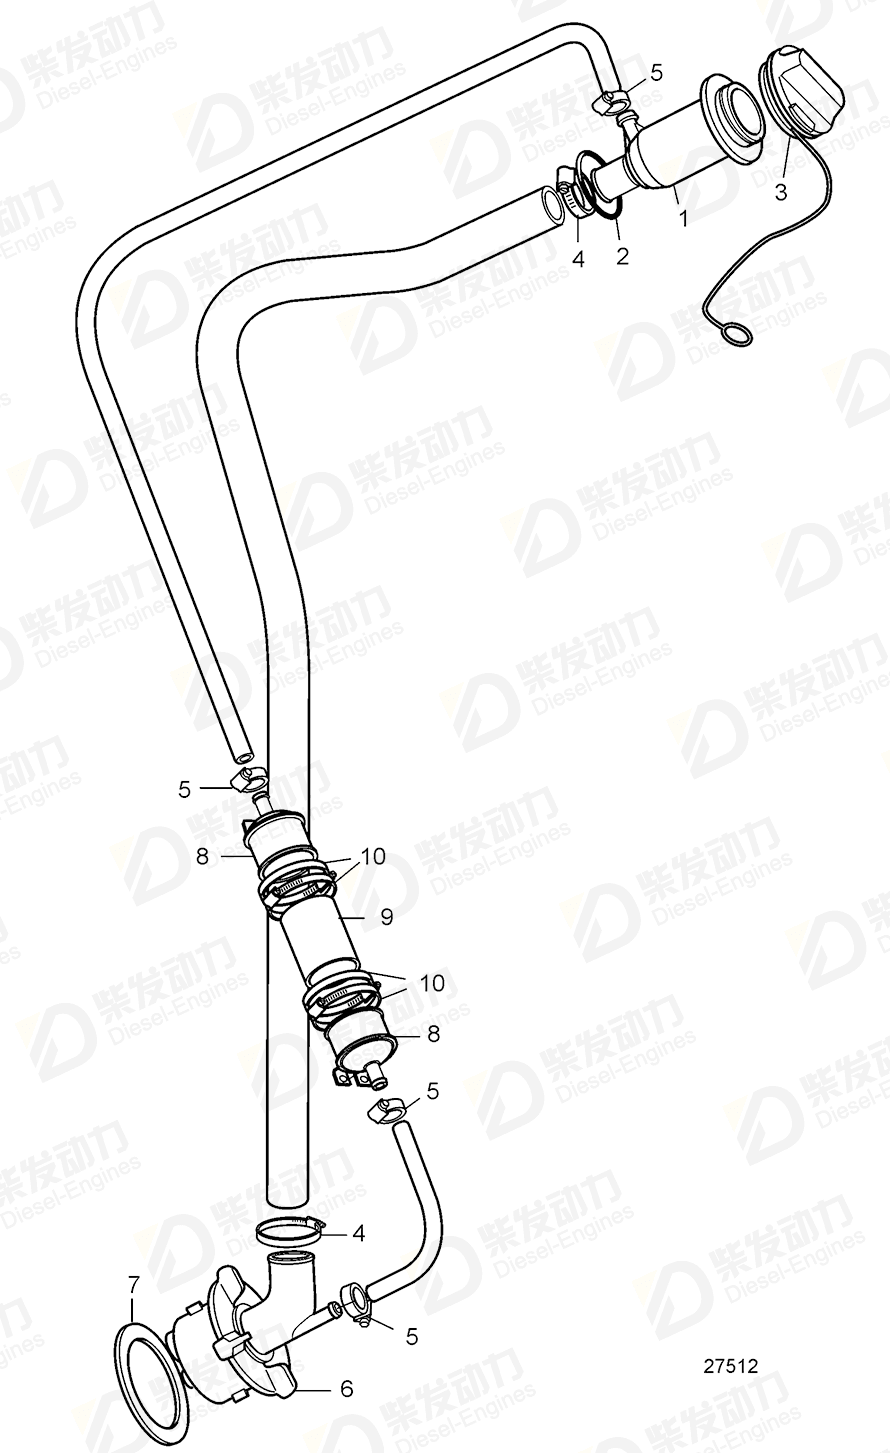 VOLVO Hose clamp 980138 Drawing